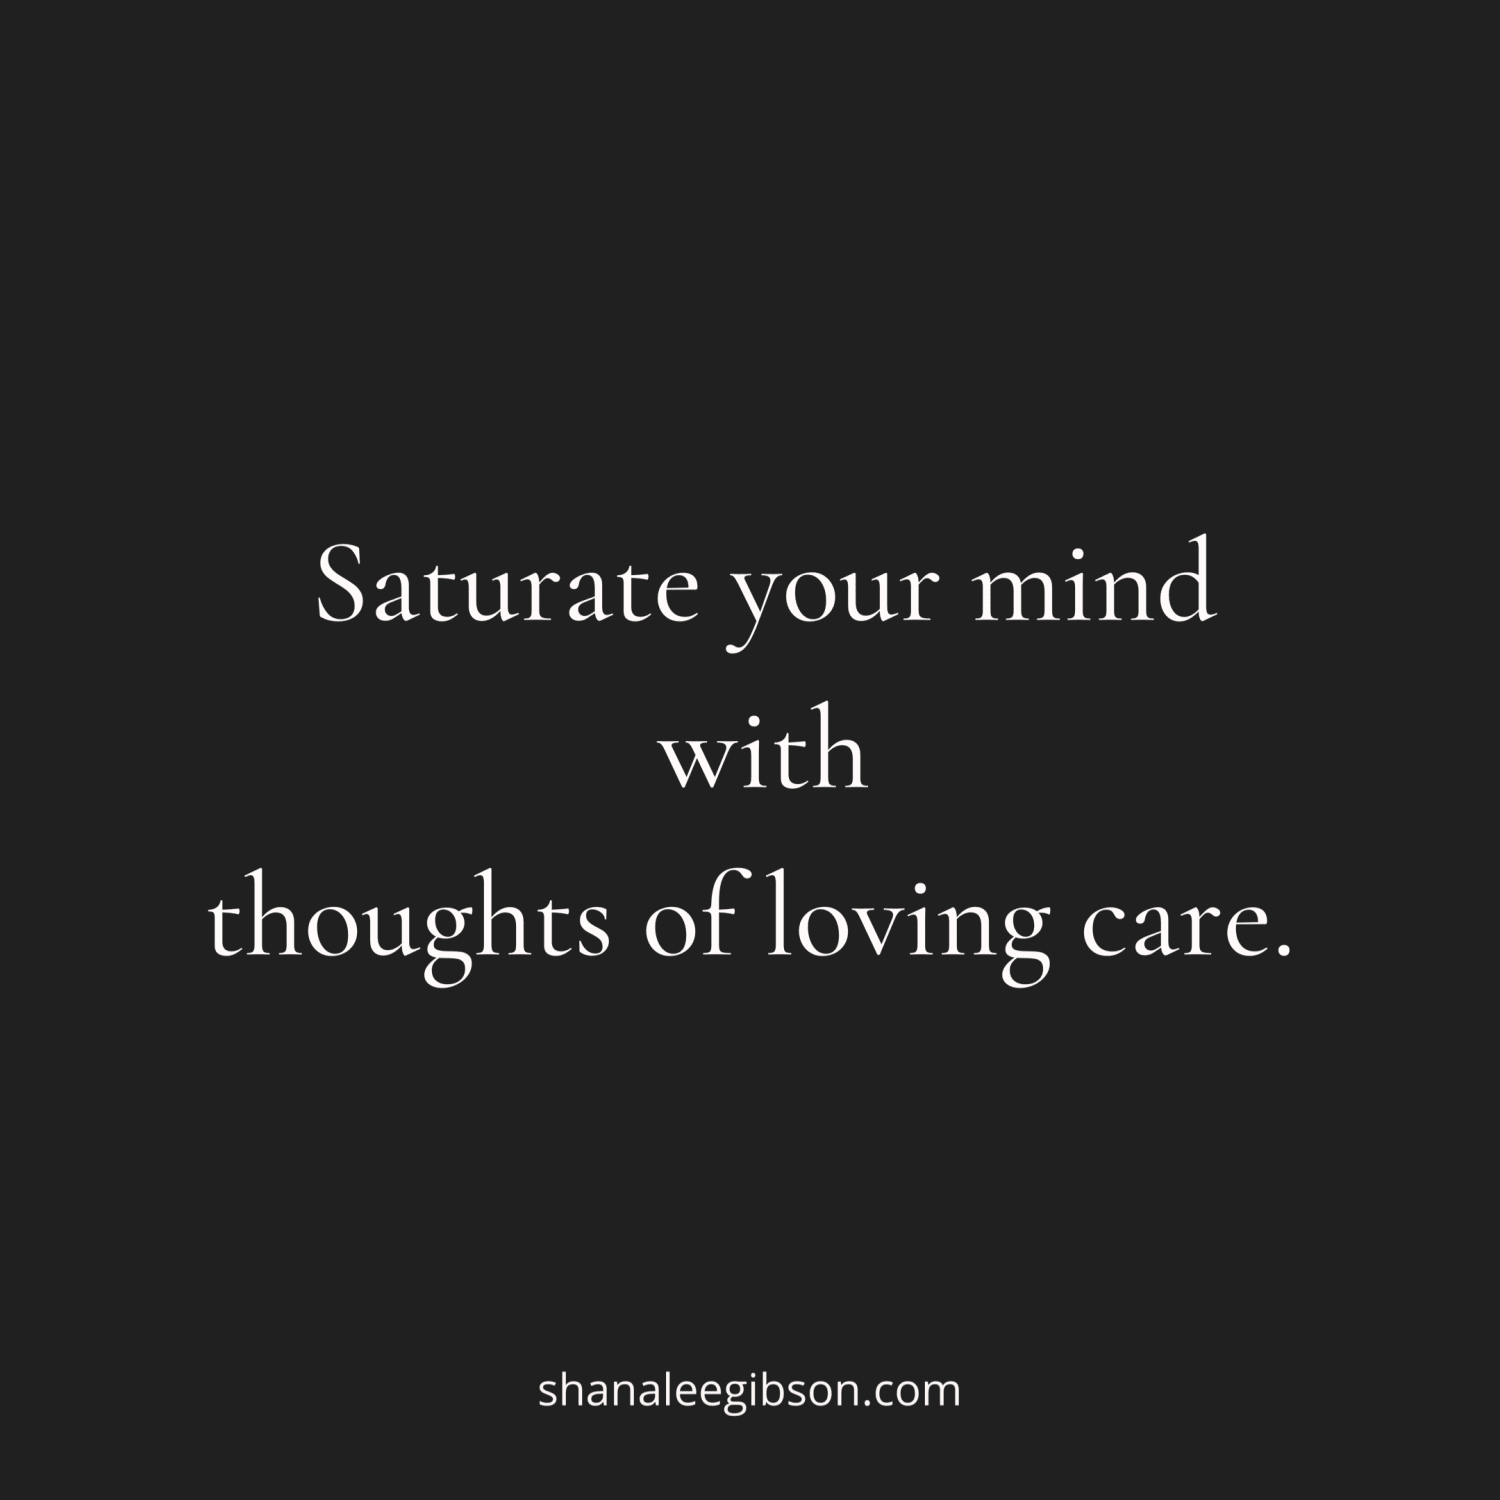 Give your mind loving care.